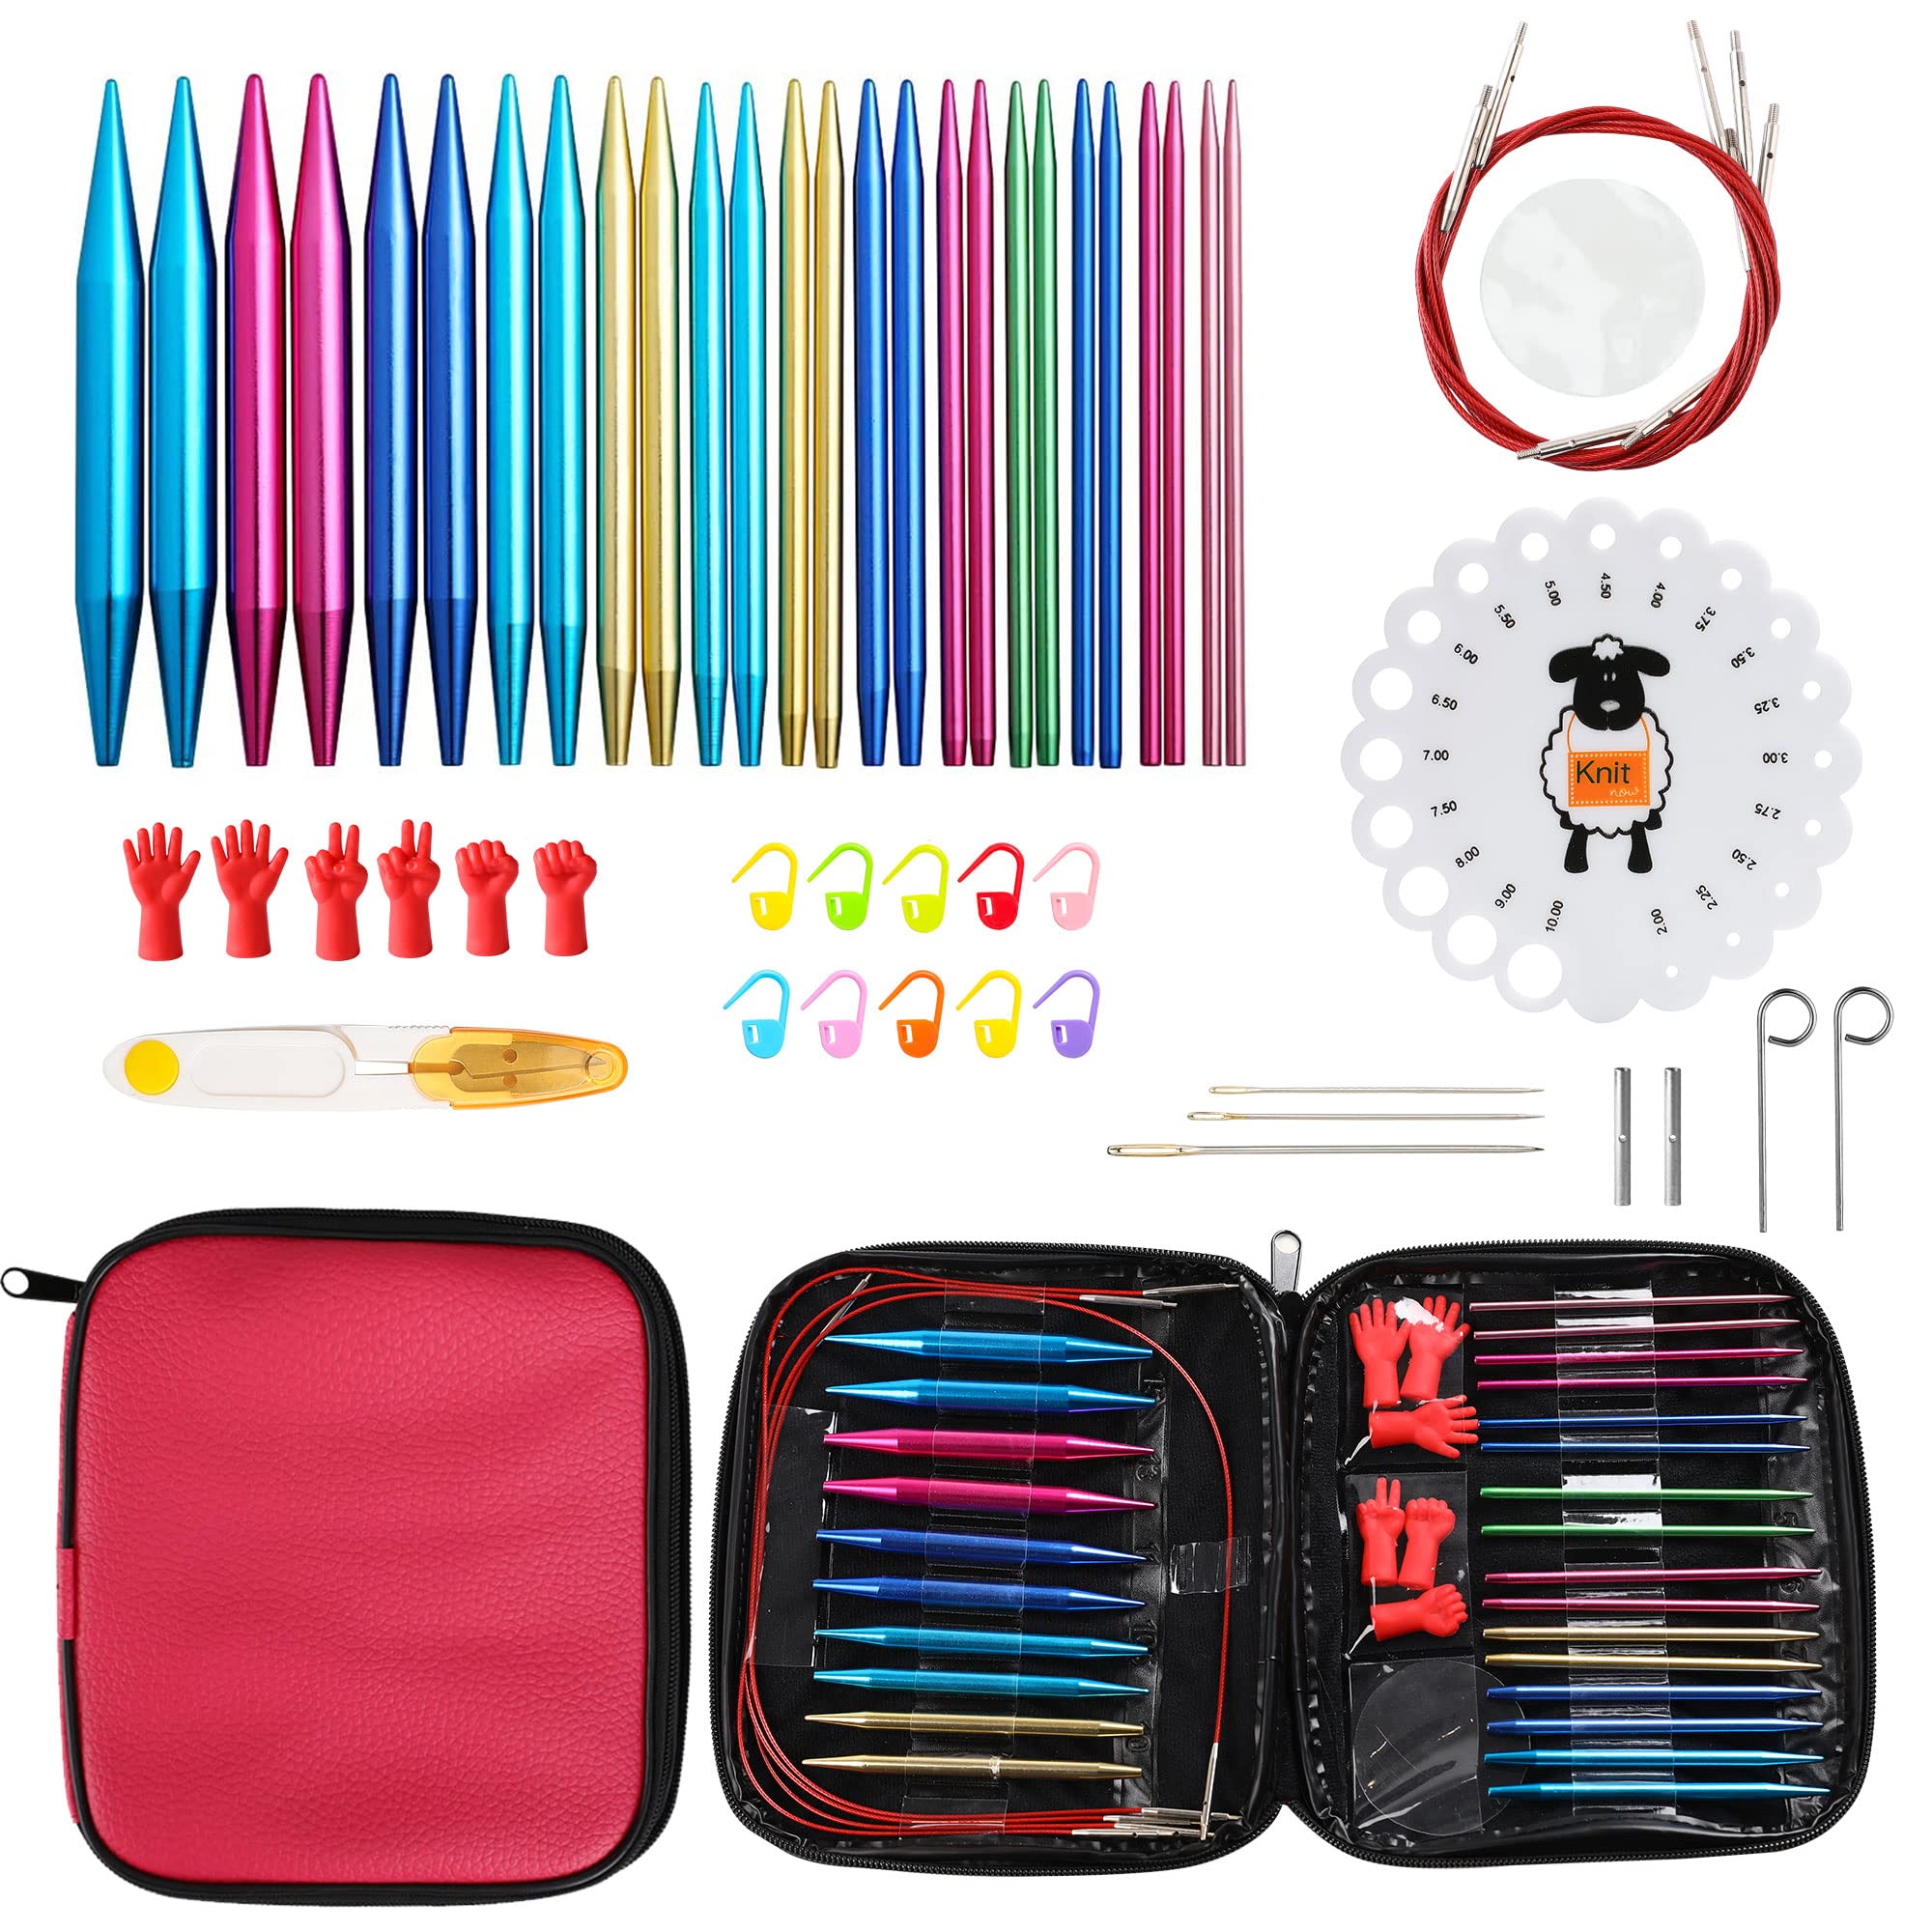 LOOEN 37pcs Aluminum Circular Knitting Needles Set with Ergonomic Handles  13 Size Interchangeable Crochet Needles with Storage Case for Small Project  (Style 1) Rose Red